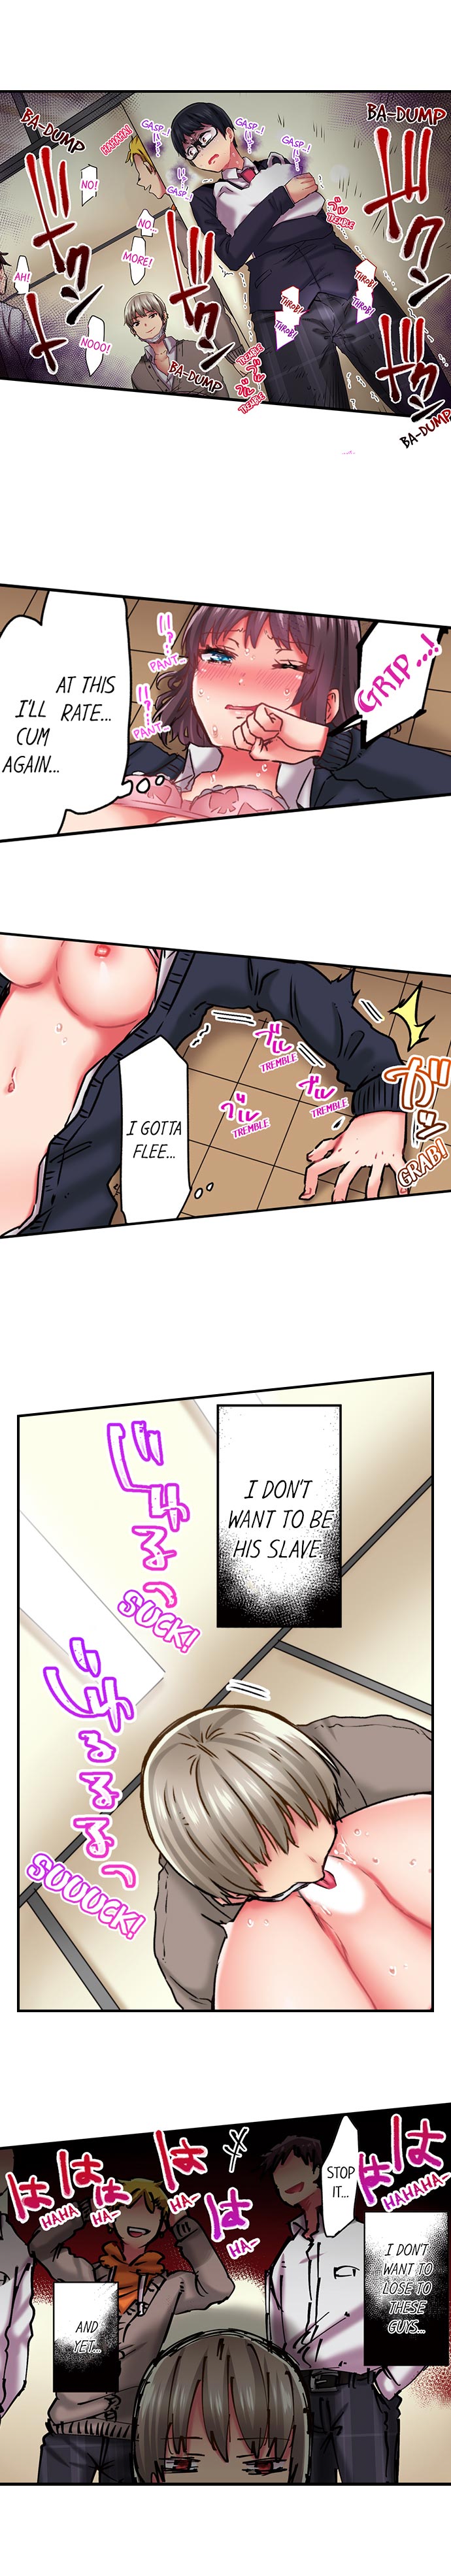 Cumming 100 Times To Protect My Crush - Chapter 3 Page 5